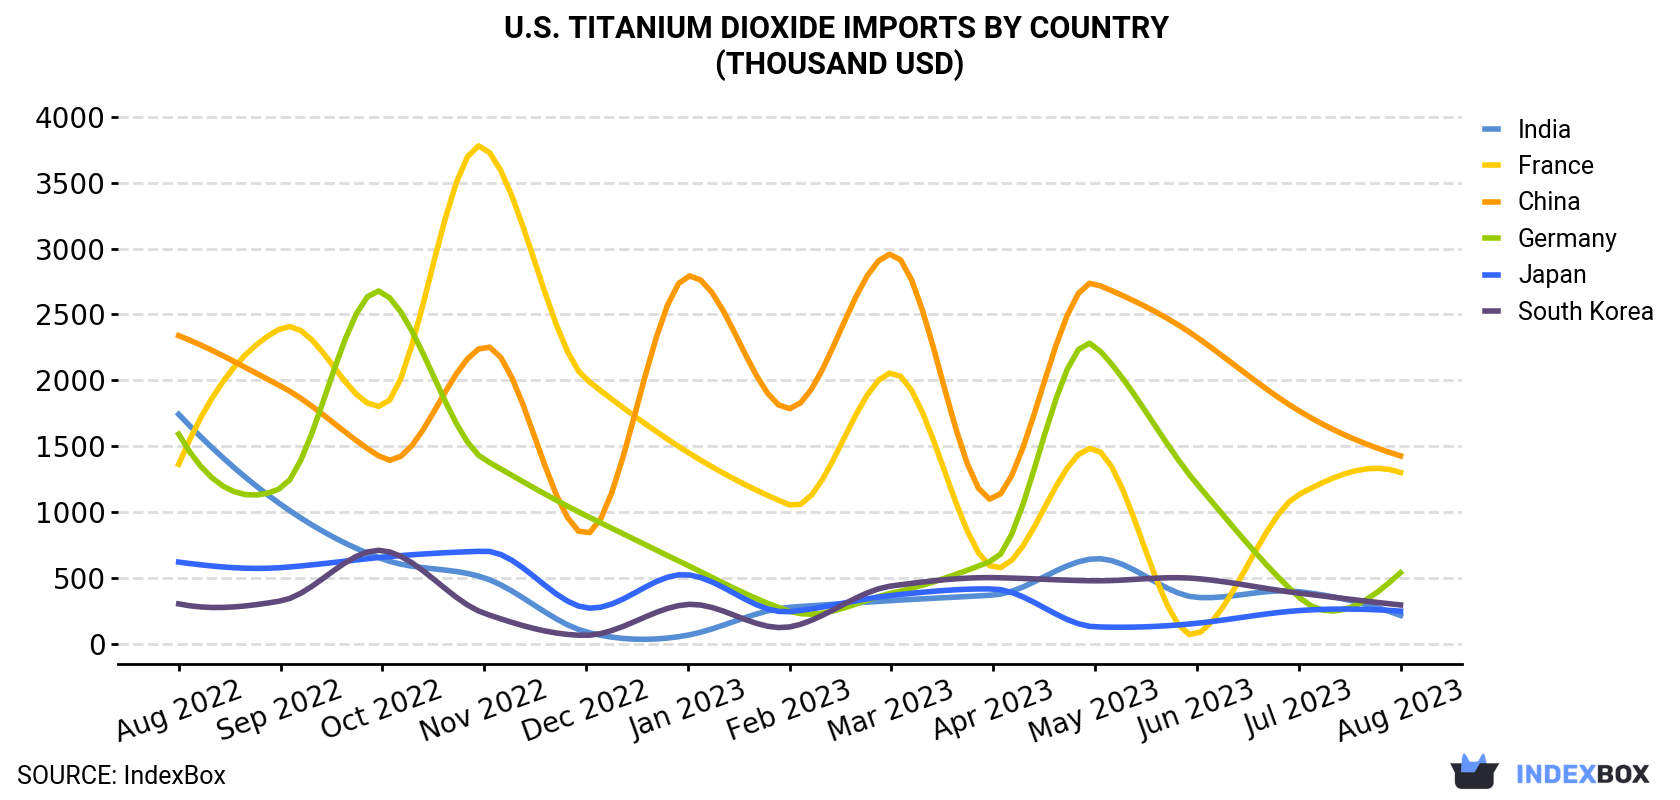 U.S. Titanium Dioxide Imports By Country (Thousand USD)